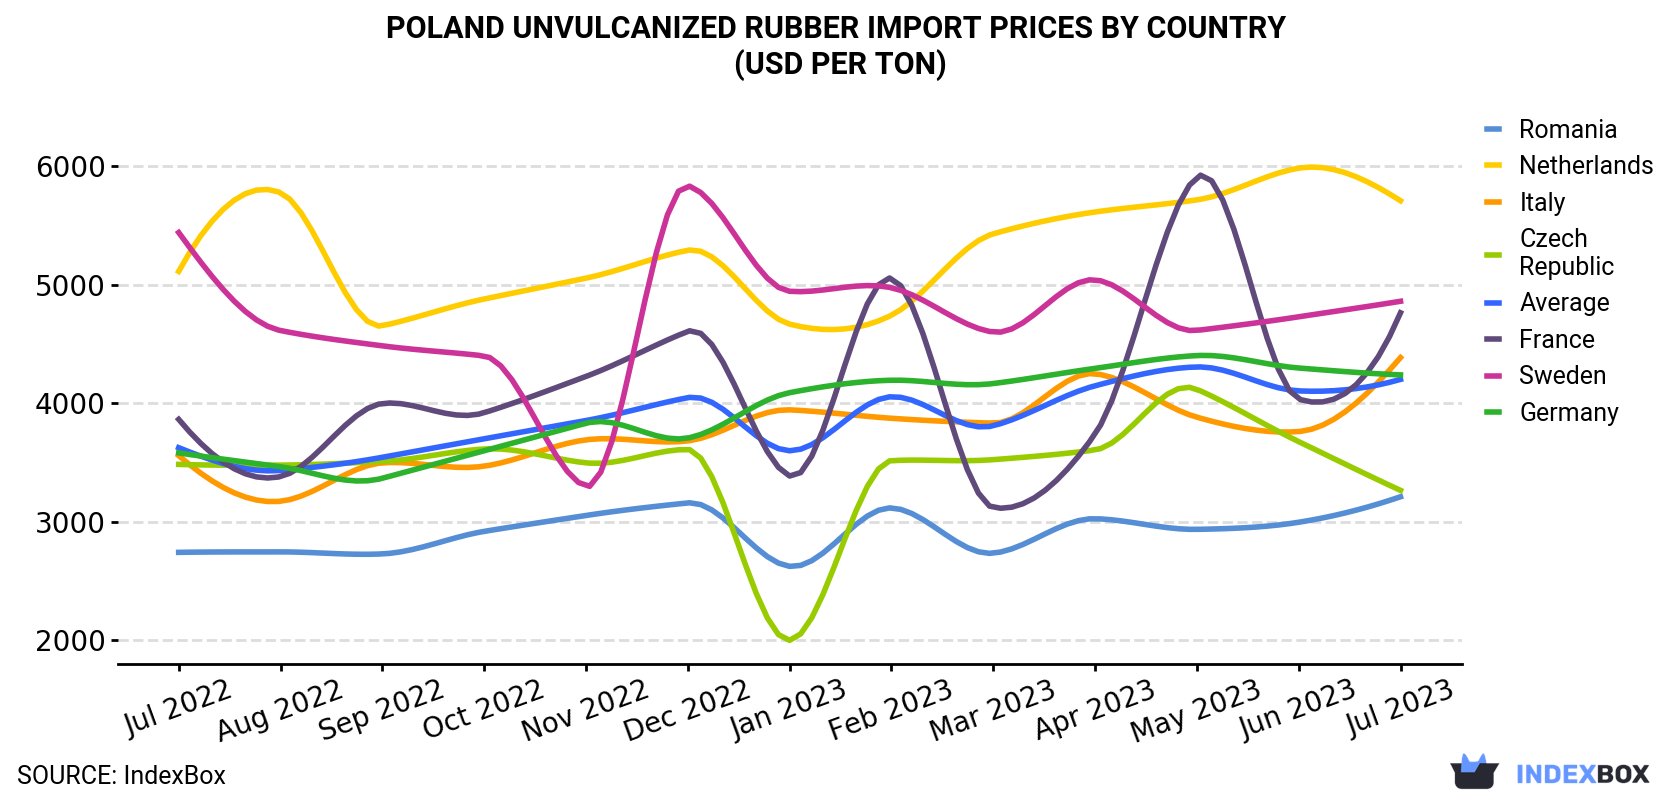 Poland Unvulcanized Rubber Import Prices By Country (USD Per Ton)